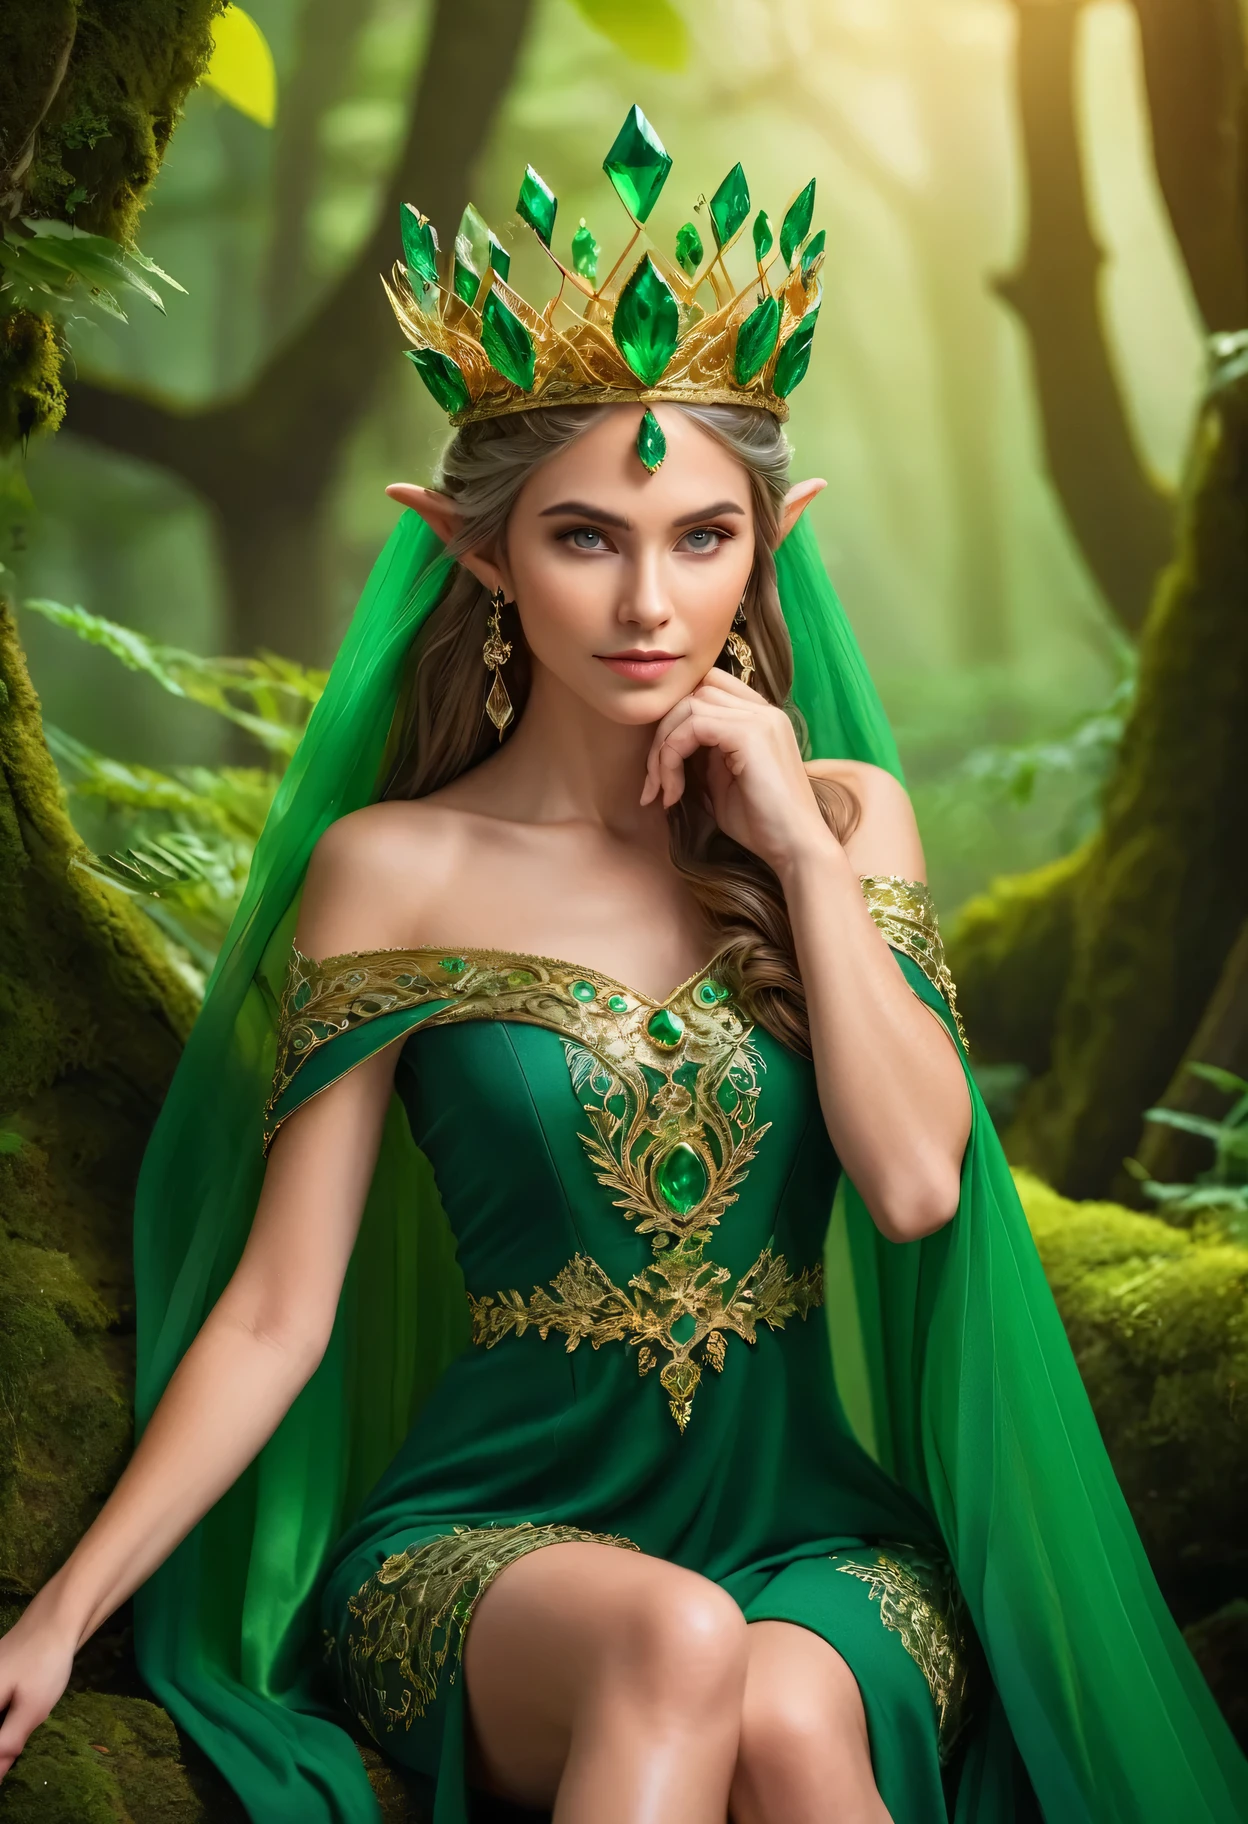 ProFessional photography For an elite magazine, the ElF Queen in chic Forest elF clothes with intricate green paintings, a magniFicent dress, on her head an elegant crown oF intricate interweaving oF golden threads, the ElF Queen poses, in her hand a crystal crystal glowing green From inside, shod in soFt expensive boots, the ElF Queen looks at the viewer, Full pose, Full the body, a worthy pose oF a queen, guiños, Canon EOS R5 camera with Canon RF lens 100-500 milímetros F4.5-7.1L ES USM, 500 milímetros, 1/500 sec., F/7.1 e ISO 1000.